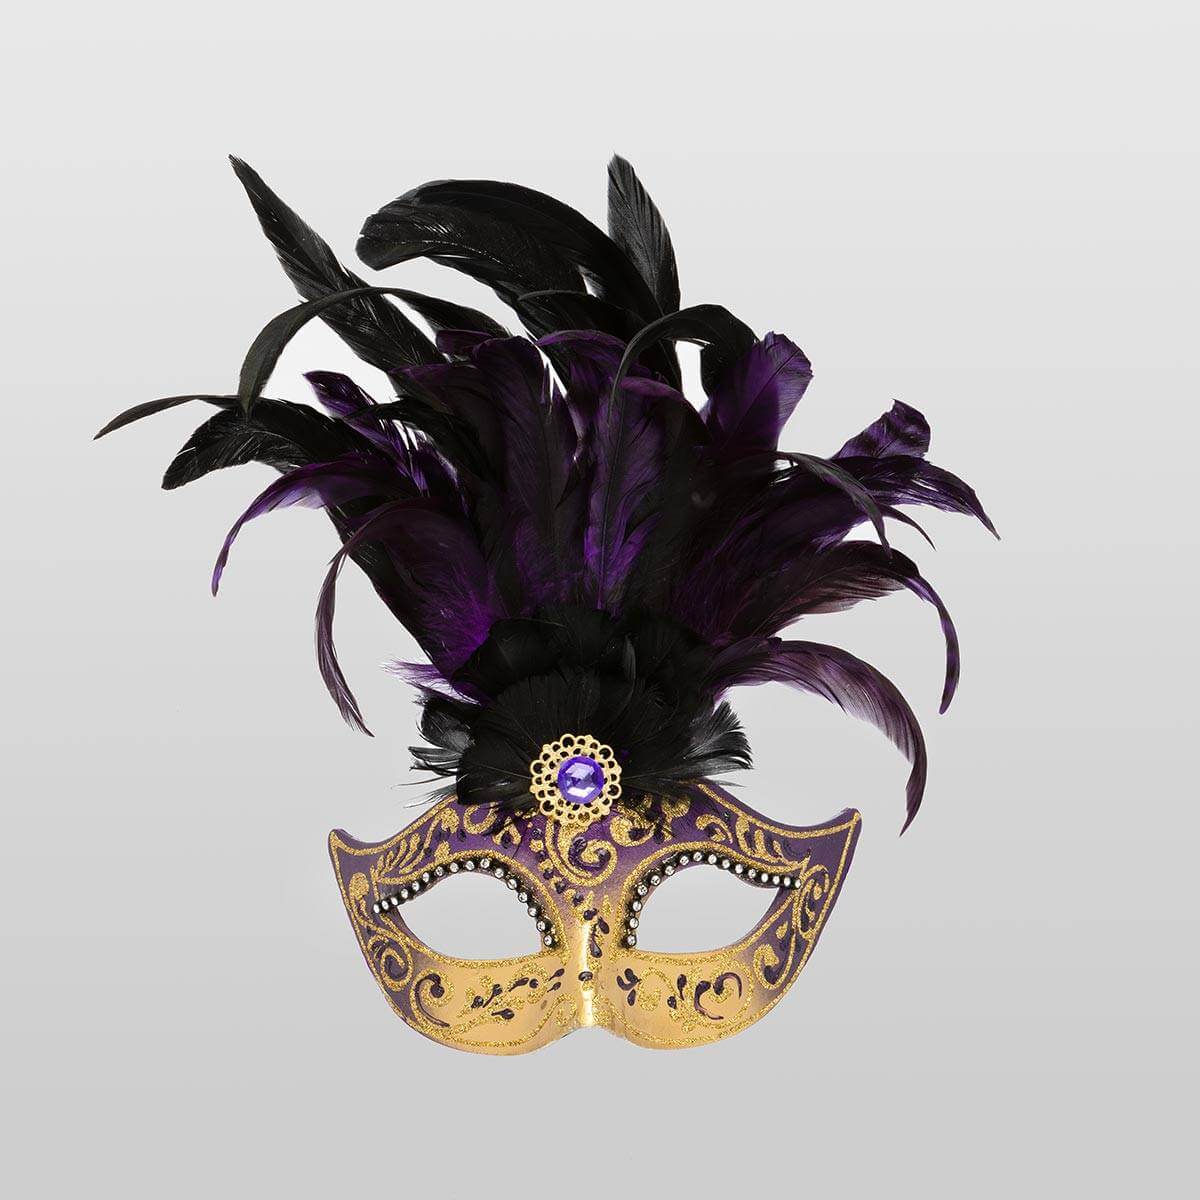 Venetian Mask, Decorative Mask, Non-wearable, Face Feathers of Different  Colors, -  Canada